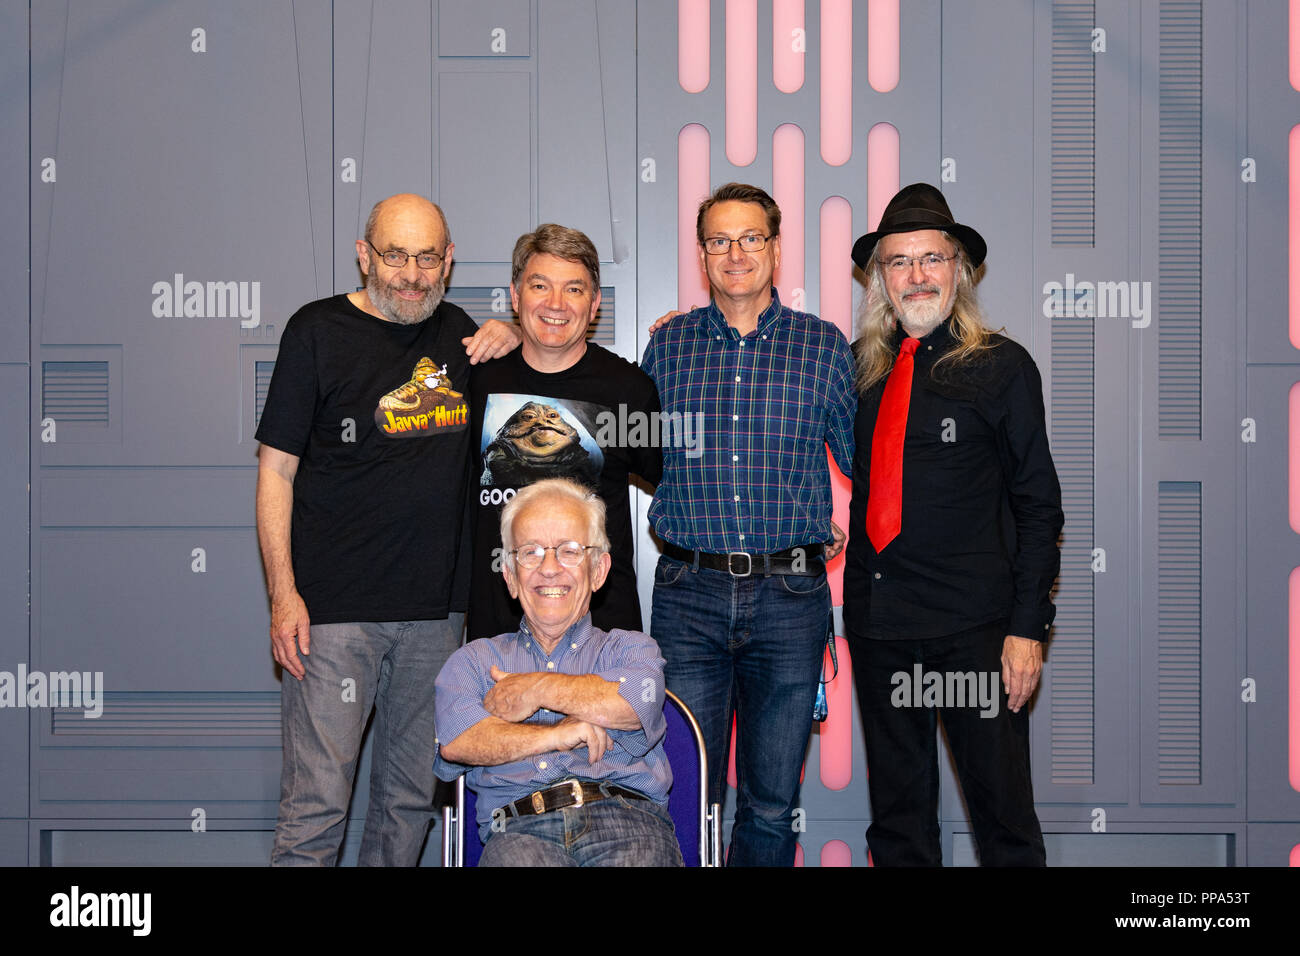 FUERTH, Germany - September 22nd 2018: John Coppinger, Dave Barclay, Jez Harris, Toby Philpott and Mike Edmonds at Noris Force Con 5, a three day star Stock Photo